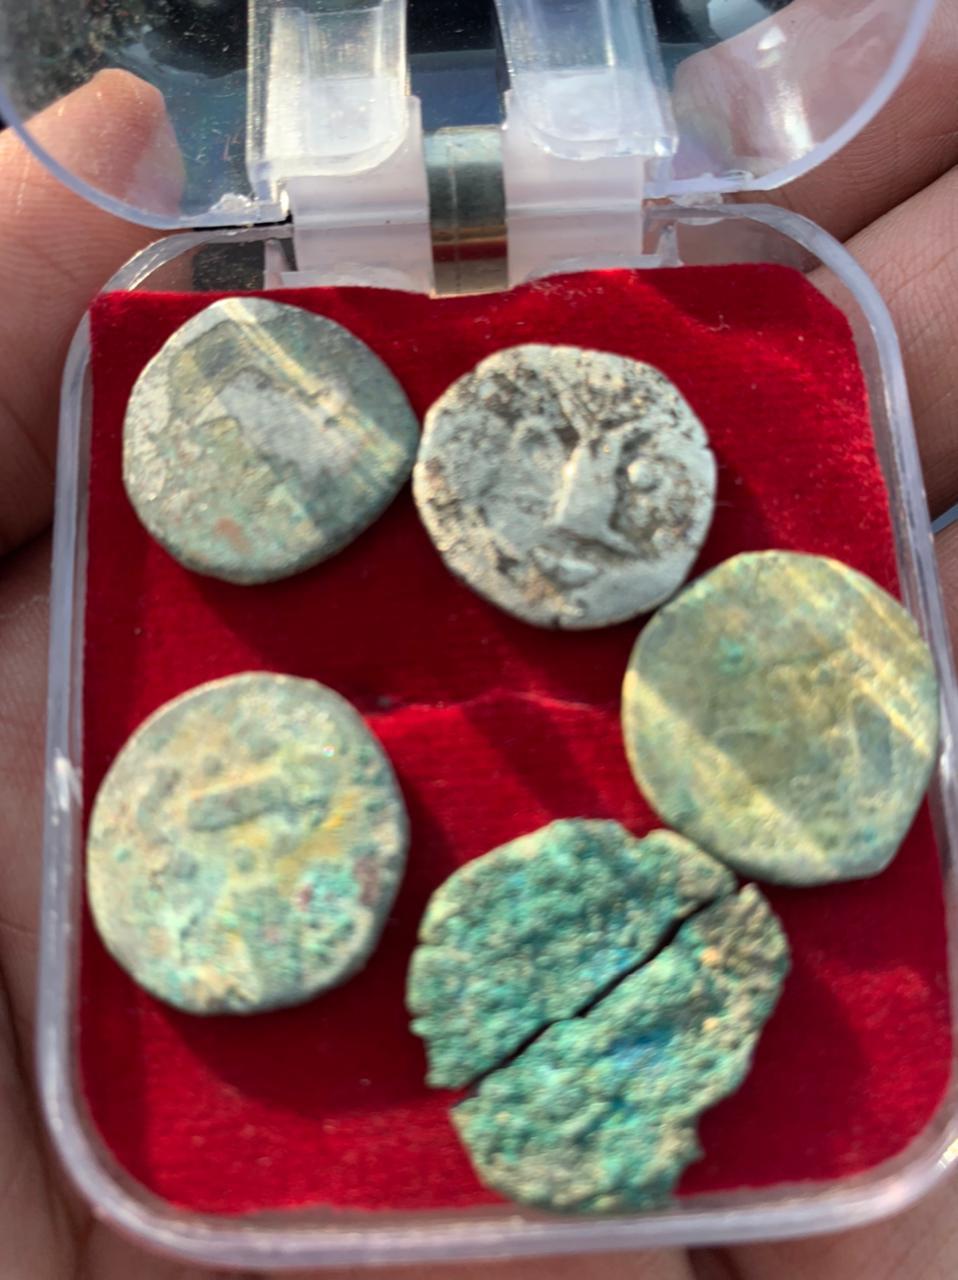 Ancient coins unearthed from old fort in Yamunanagar district